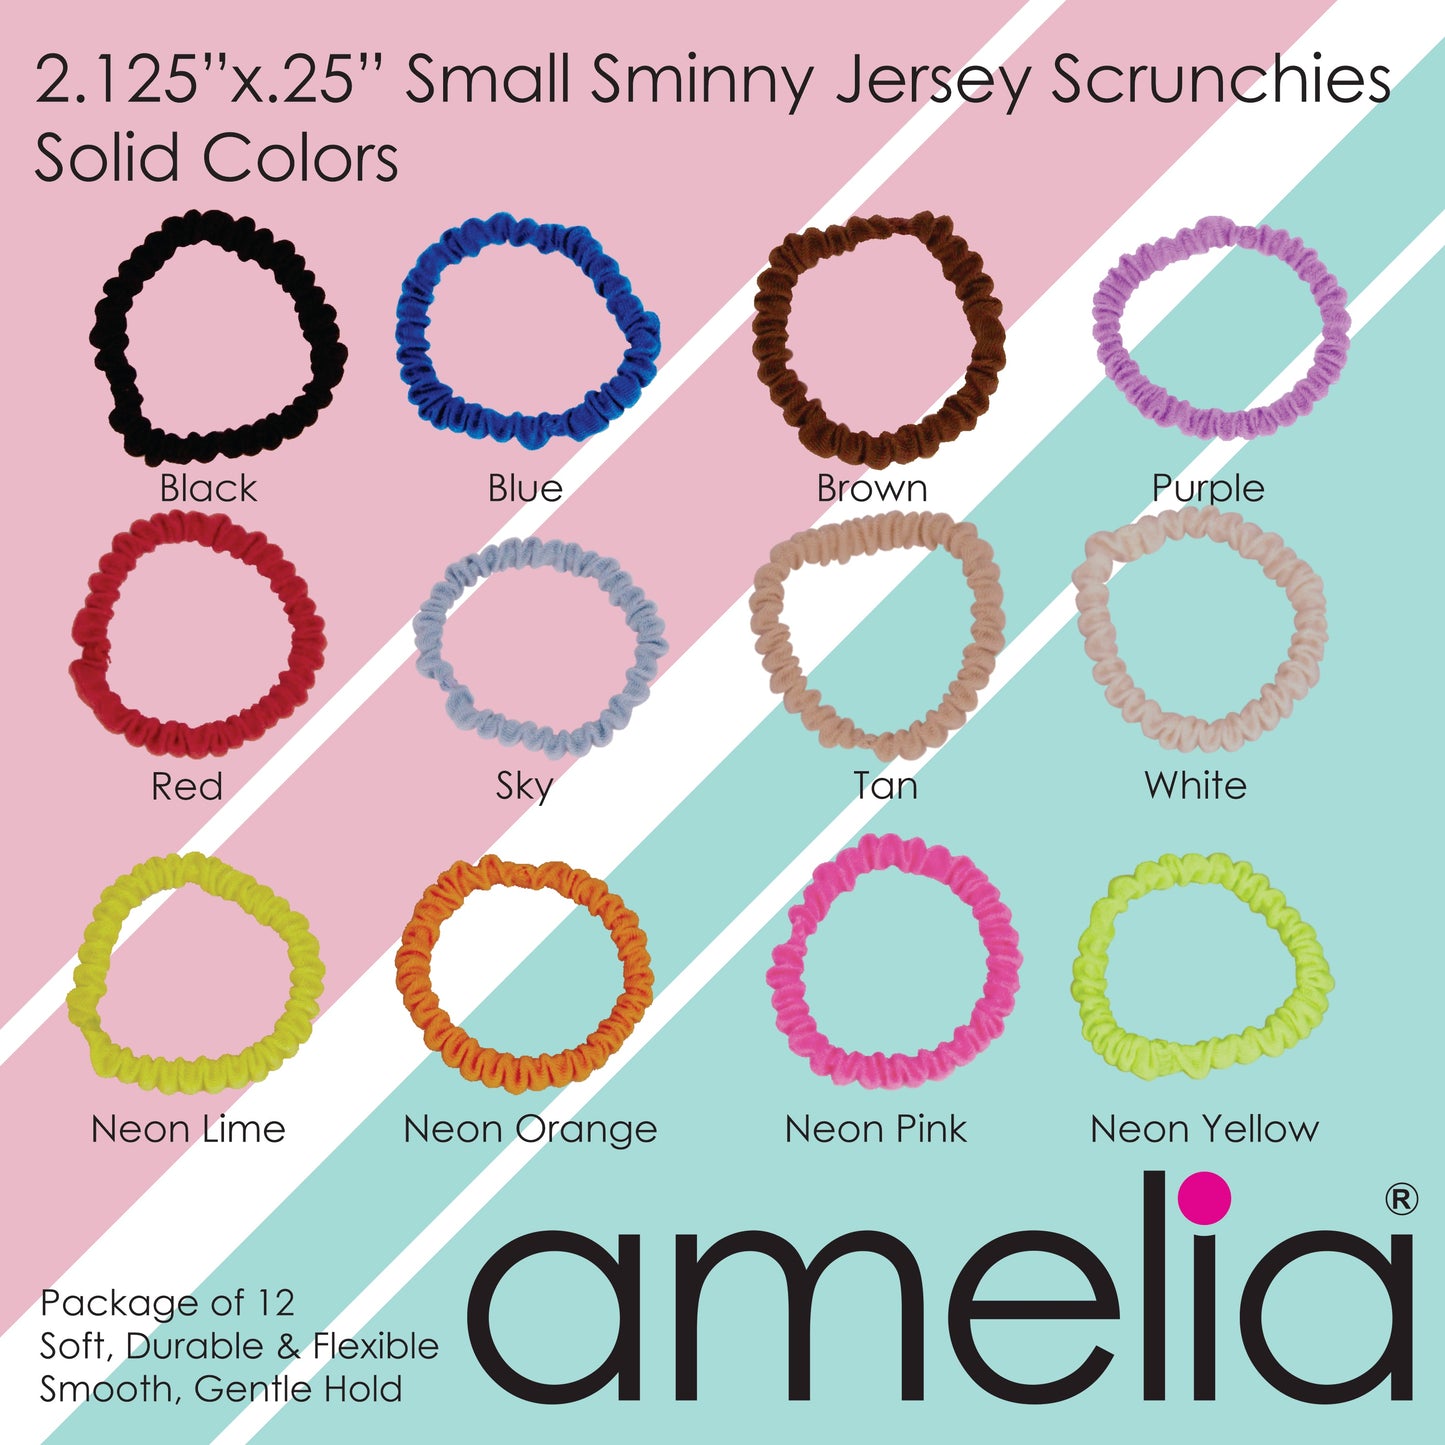 Amelia Beauty, Neon Mix Skinny Jersey Scrunchies, 2.125in Diameter, Gentle on Hair, Strong Hold, No Snag, No Dents or Creases. 12 Pack